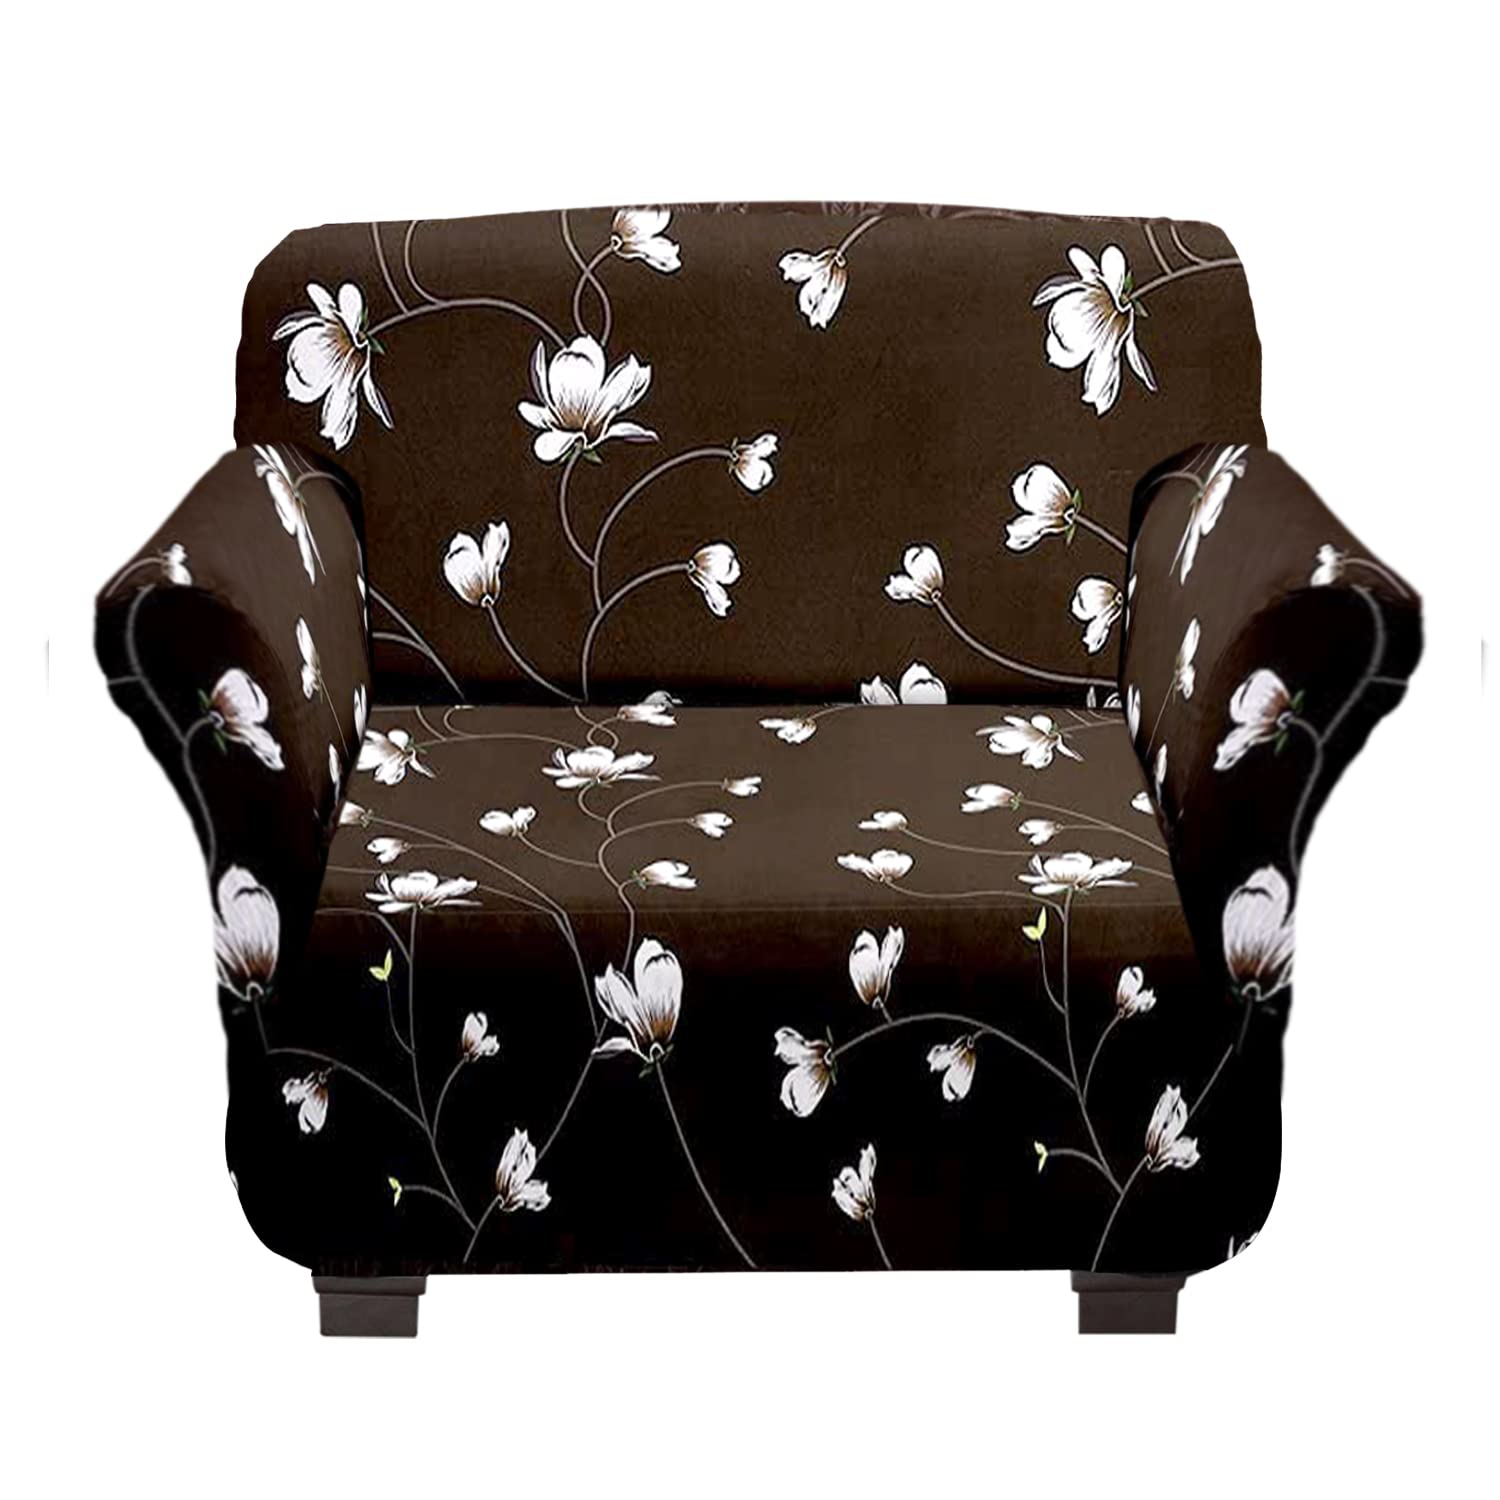 Kuber Industries Flower Printed Stretchable, Non-Slip Polyster Single Seater Sofa Cover/Slipcover/Protector with Foam Stick (Brown)-50KM01397, Standard